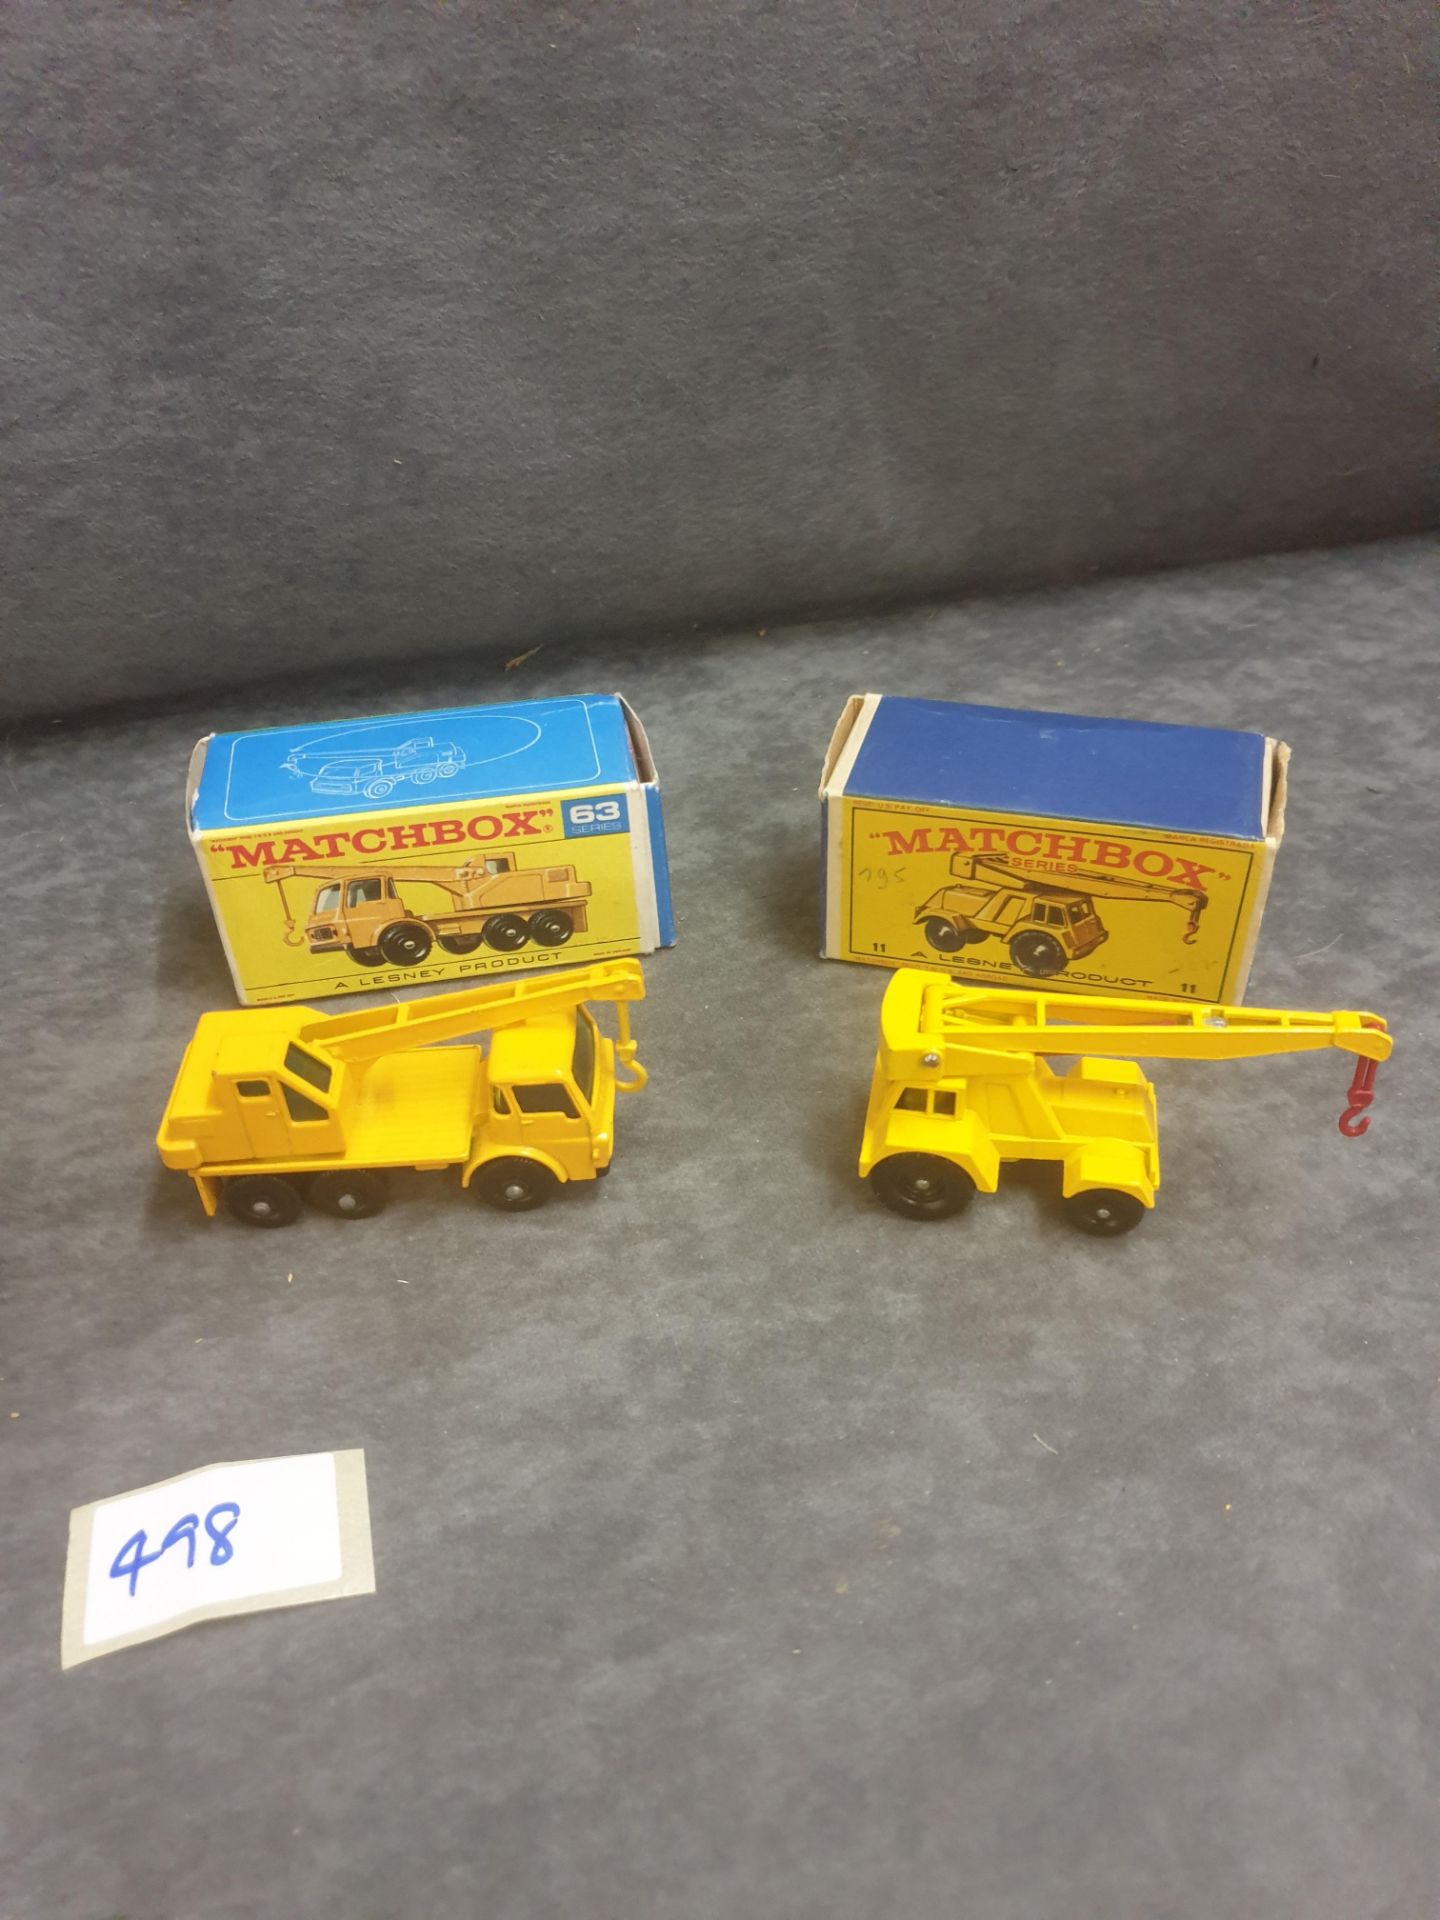 4x Matchbox Diecast Cranes All In Boxes Comprising Of #11c Jumbo Crane Mint In Excellent E Type Box - Image 3 of 3